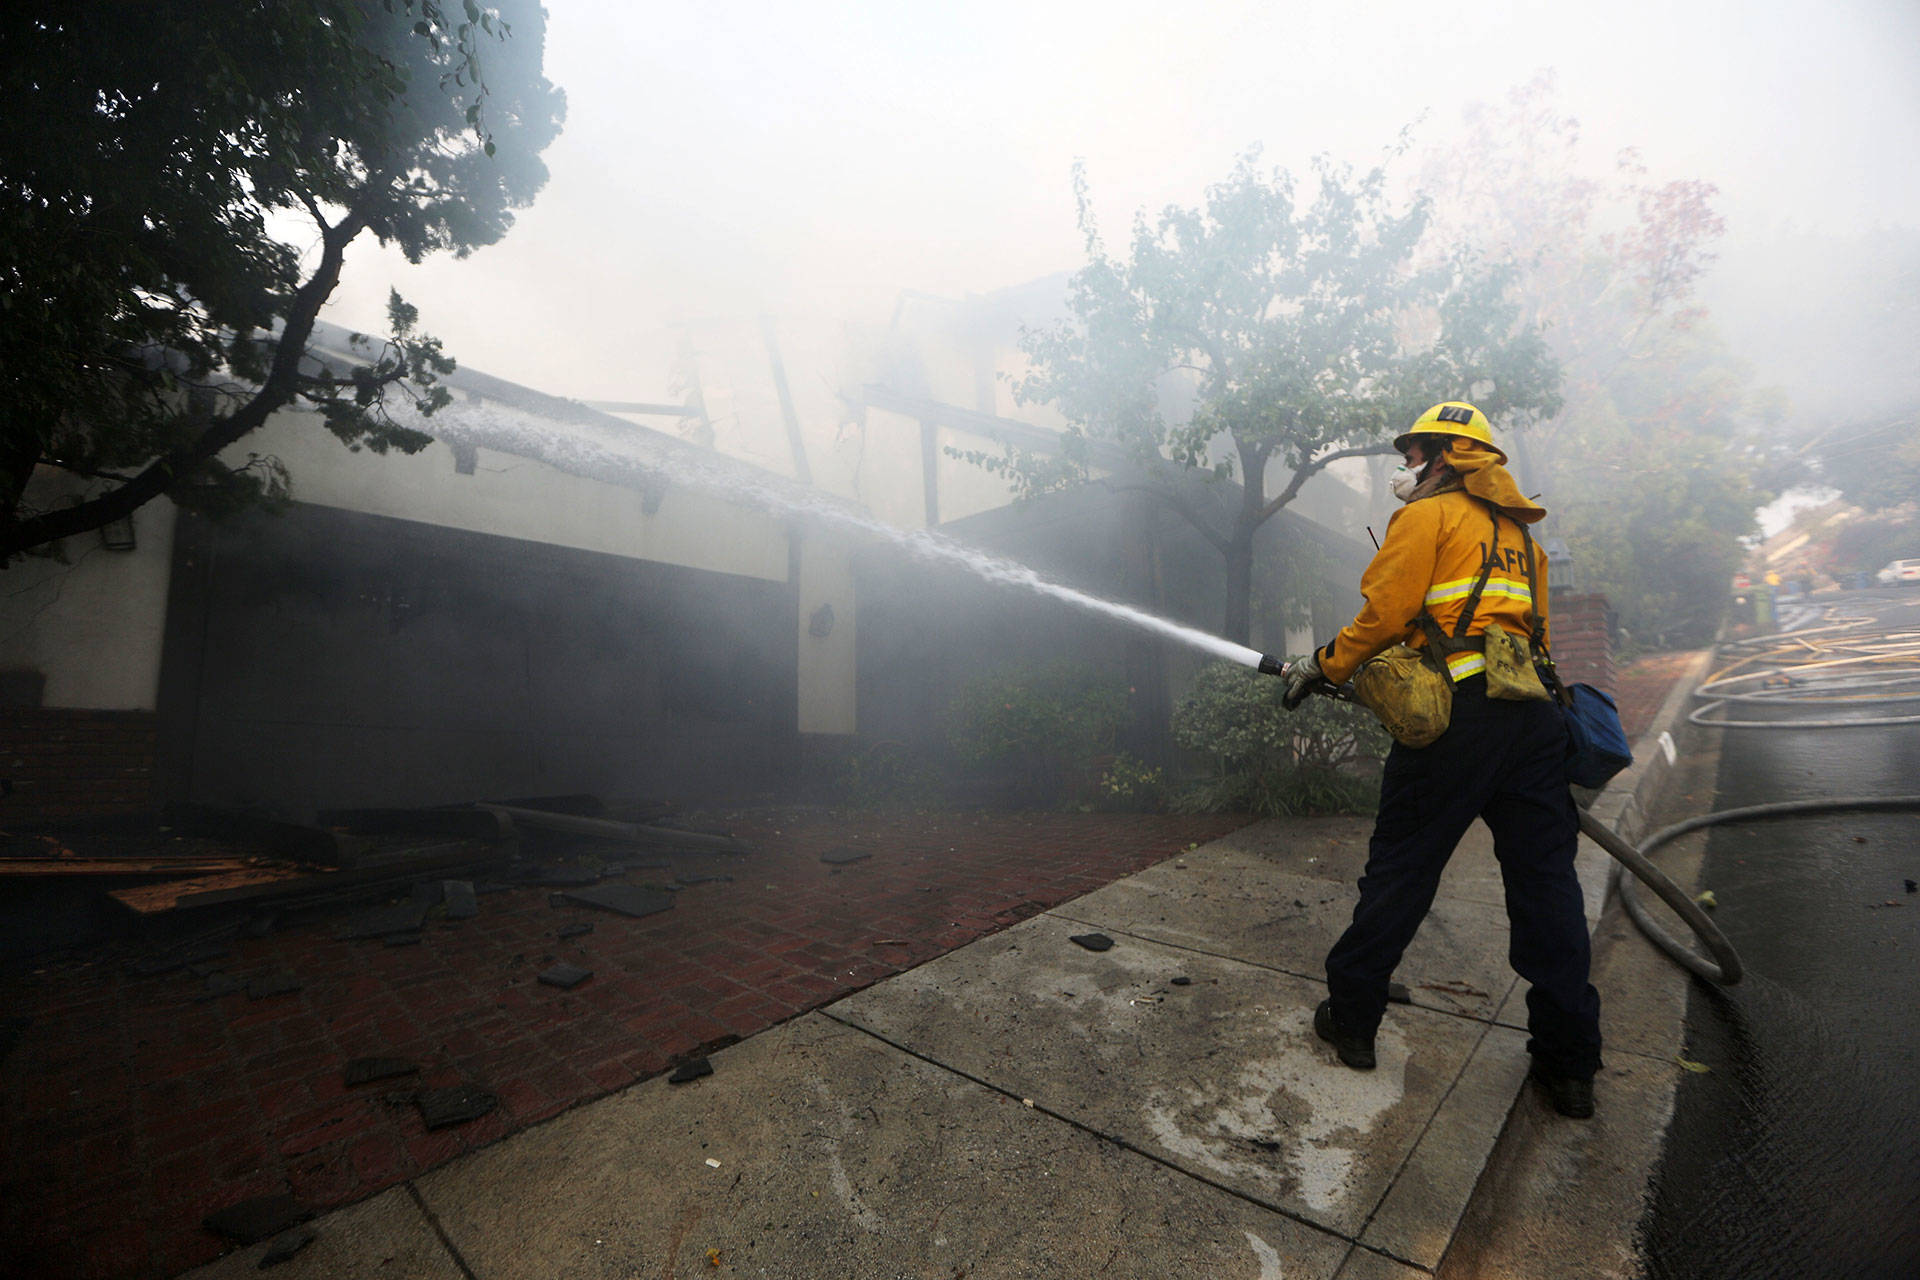 A firefighter sprays water on a burning home in the wealthy Bel Air neighborhood during the Skirball Fire on Dec. 6, 2017. Mario Tama/Getty Images